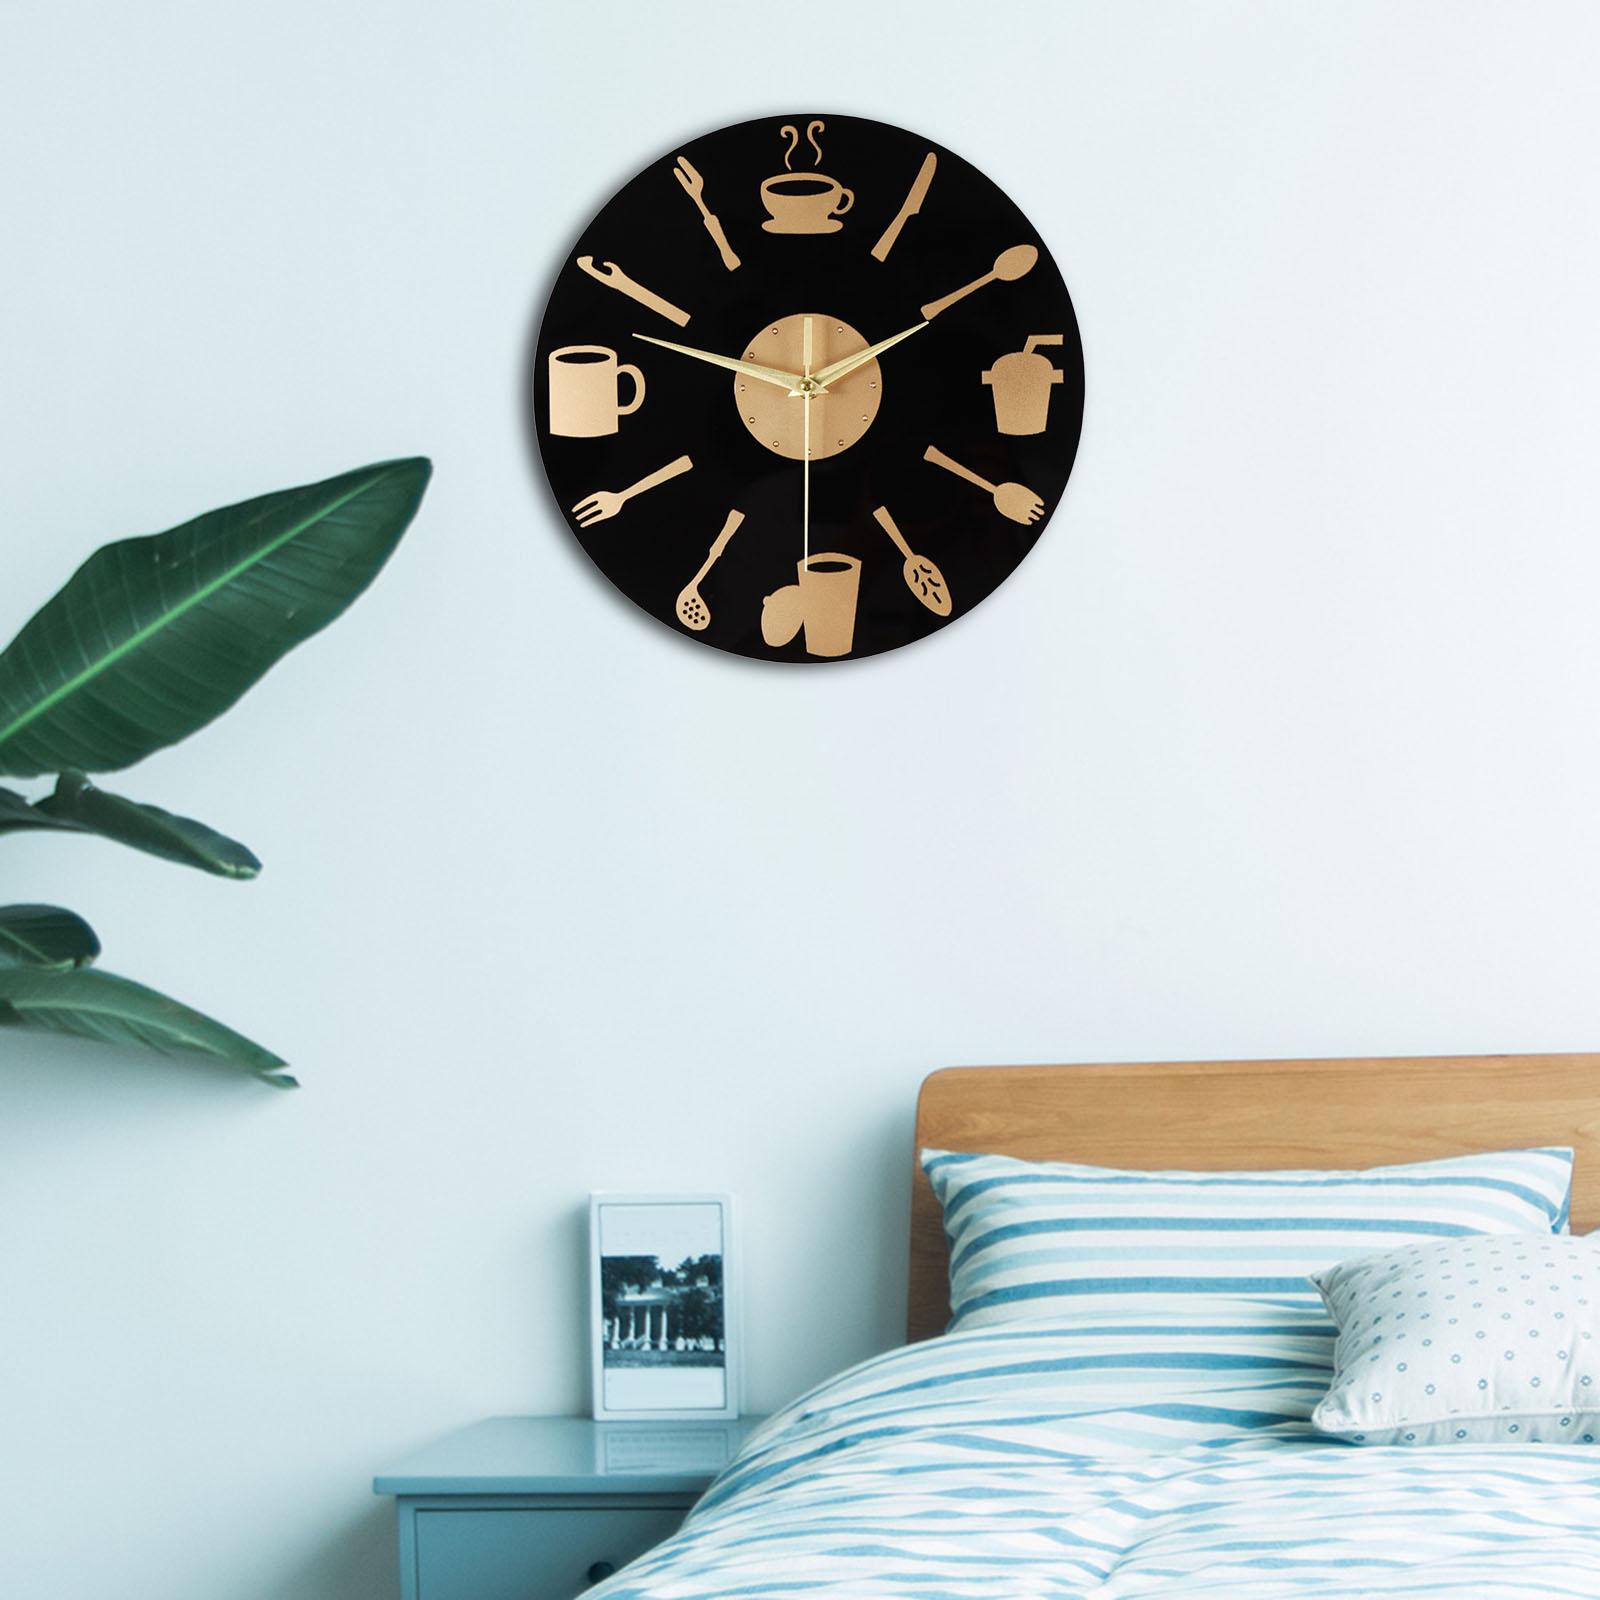 Minimalist Simple Wall Clock Silent 12" Clocks for Dining Room Cafe Shop